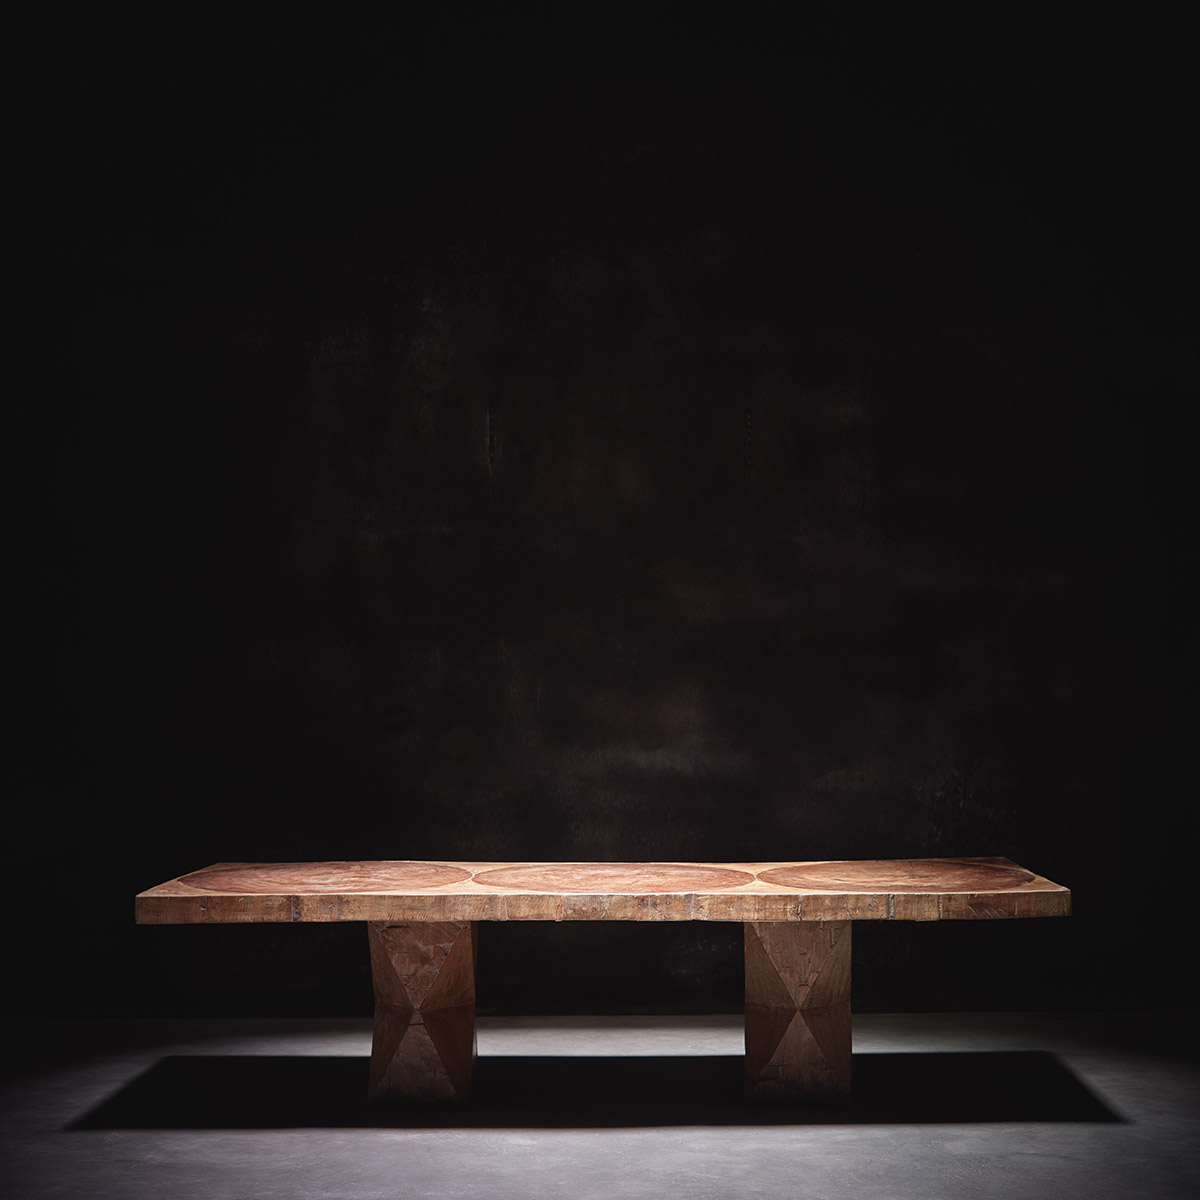 Low coffee table photographed under spotlight in a dark room